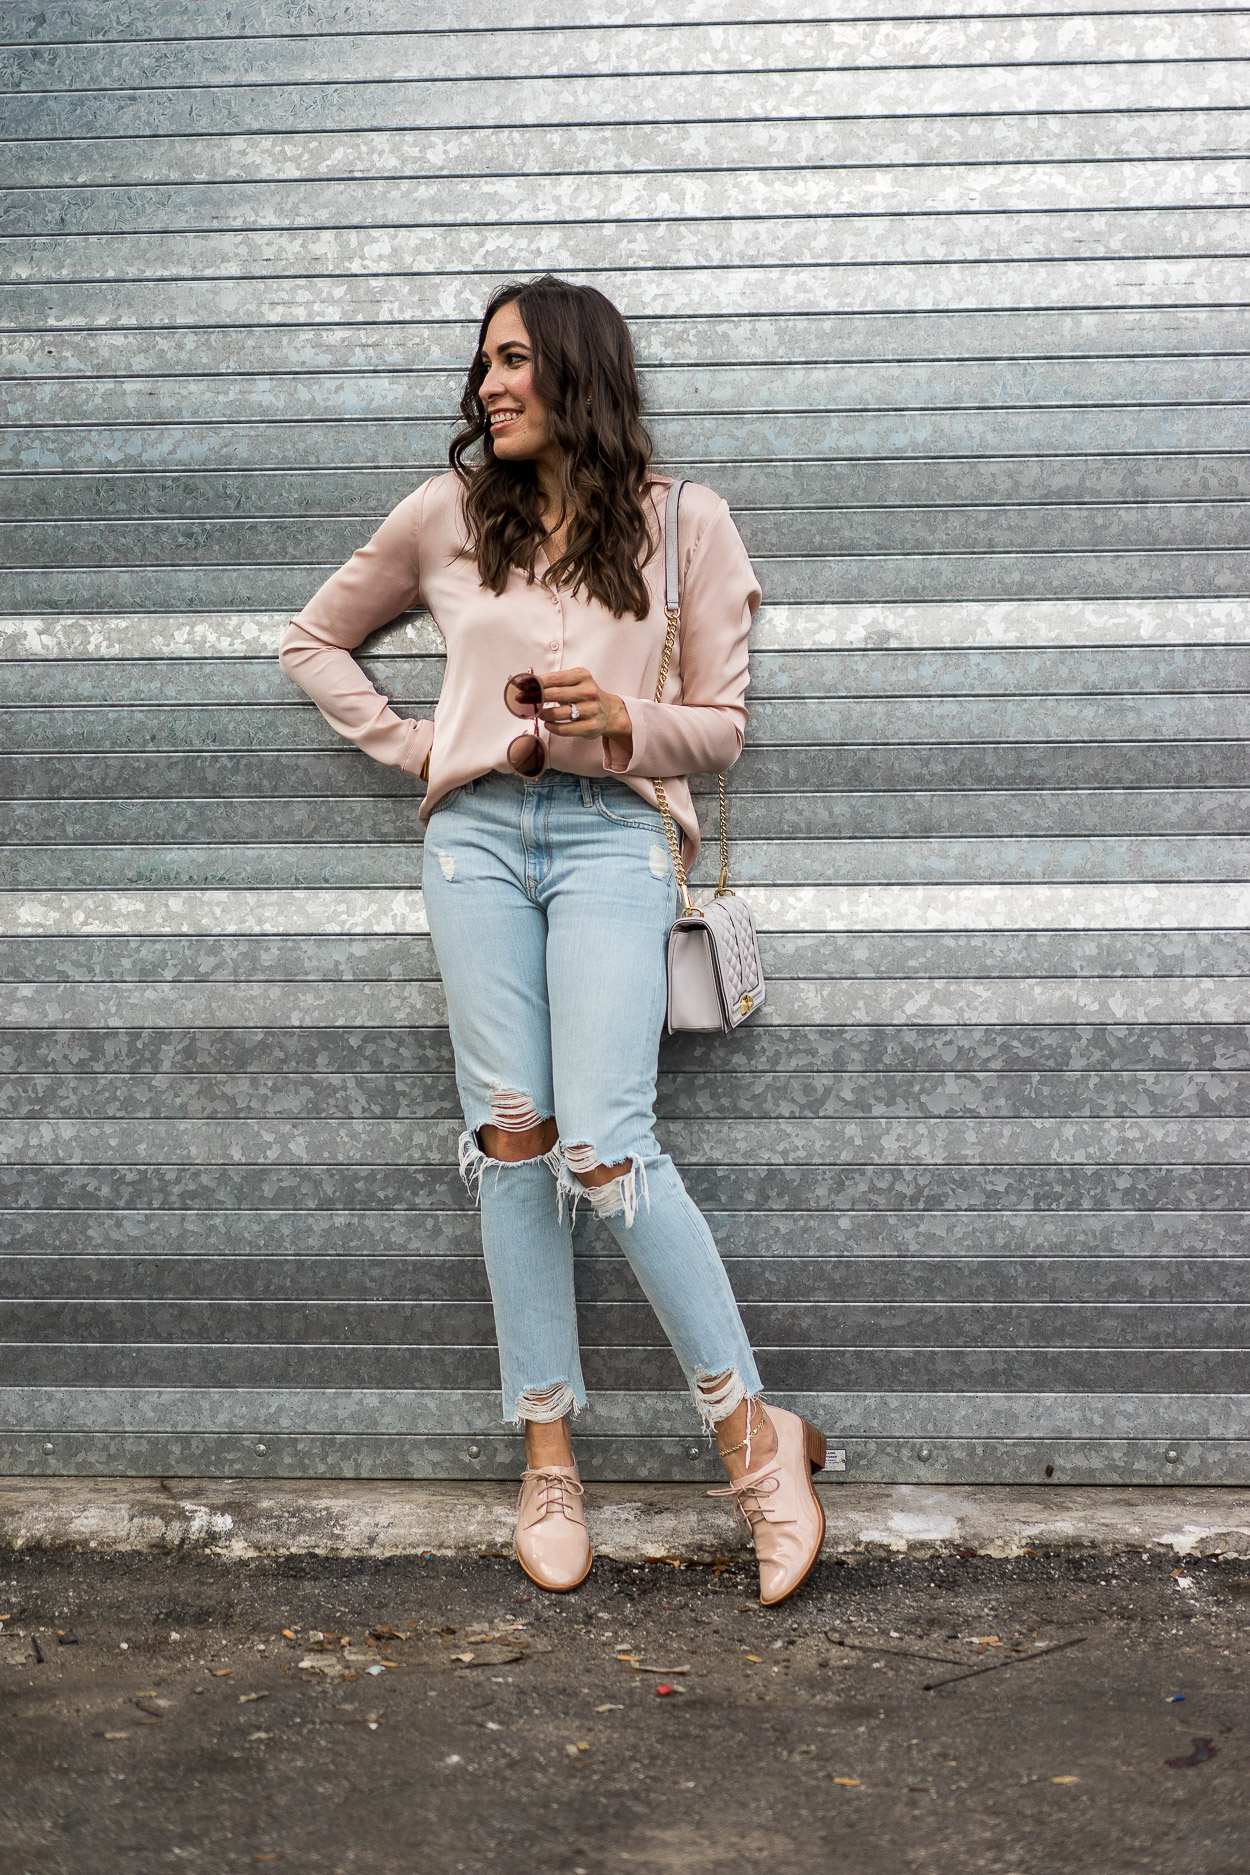 The pajama top trend is booming right now and AGlamLifestyle blogger Amanda shows you how to style it with distressed Lovers + Friends denim and Rebecca Minkoff Love crossbody bag